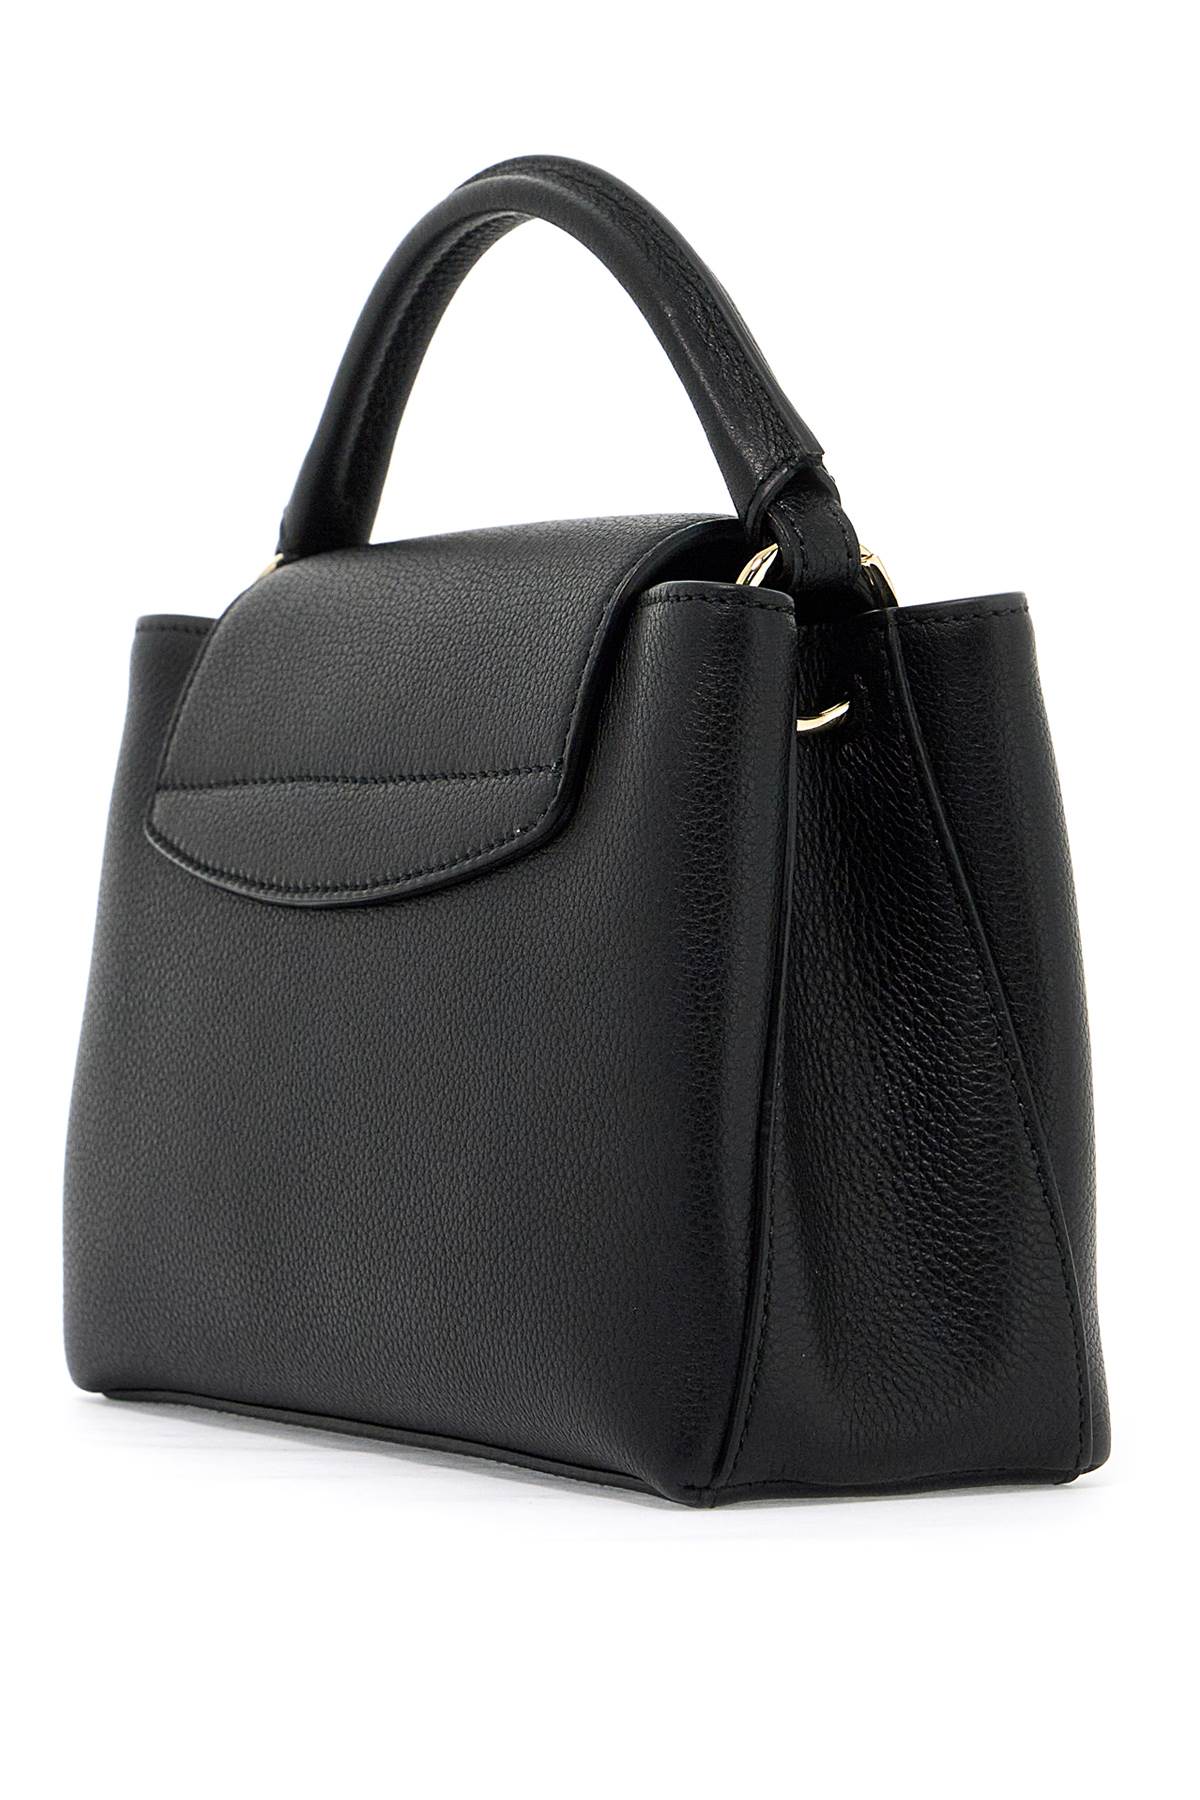 Bally "handbag Layka In Hammered Leatherreplace With Double Quote   Black